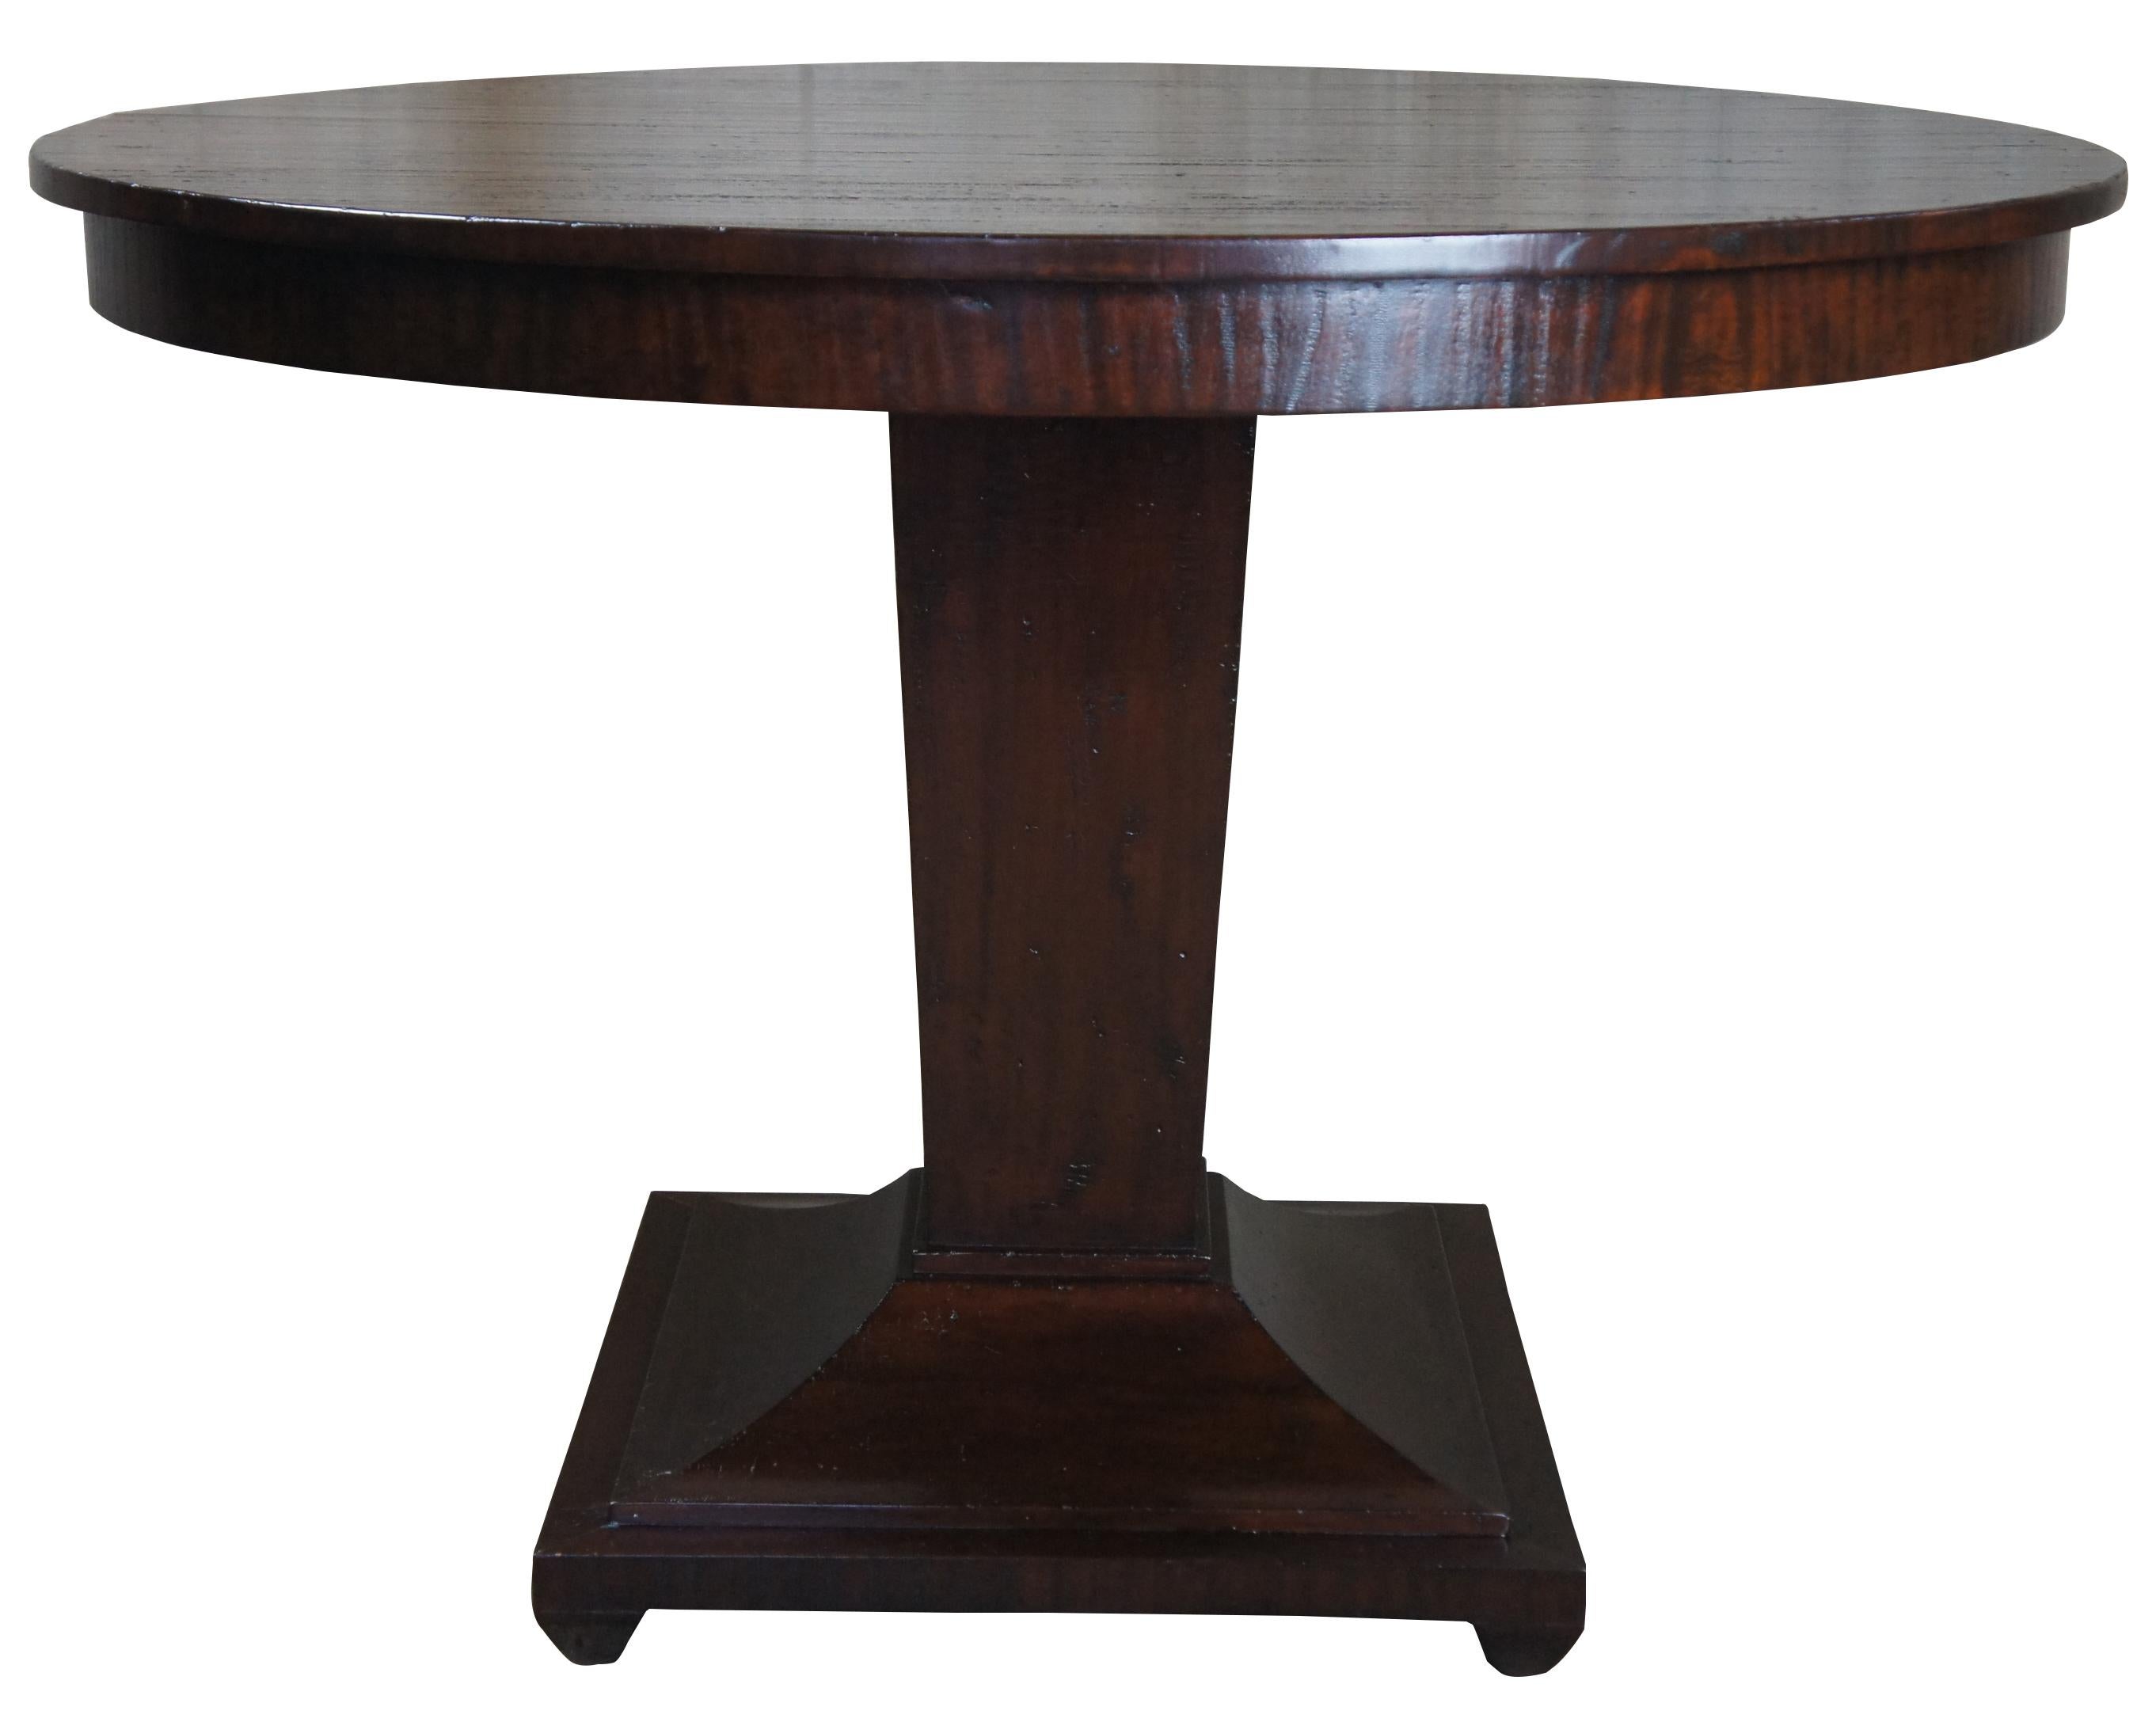 Henredon acquisitions round mahogany center pedestal table traditional modern

Featuring casual, yet attractive designs, this center table makes an excellent contribution to your breakfast nook. A round tabletop and single pedestal with bold lines